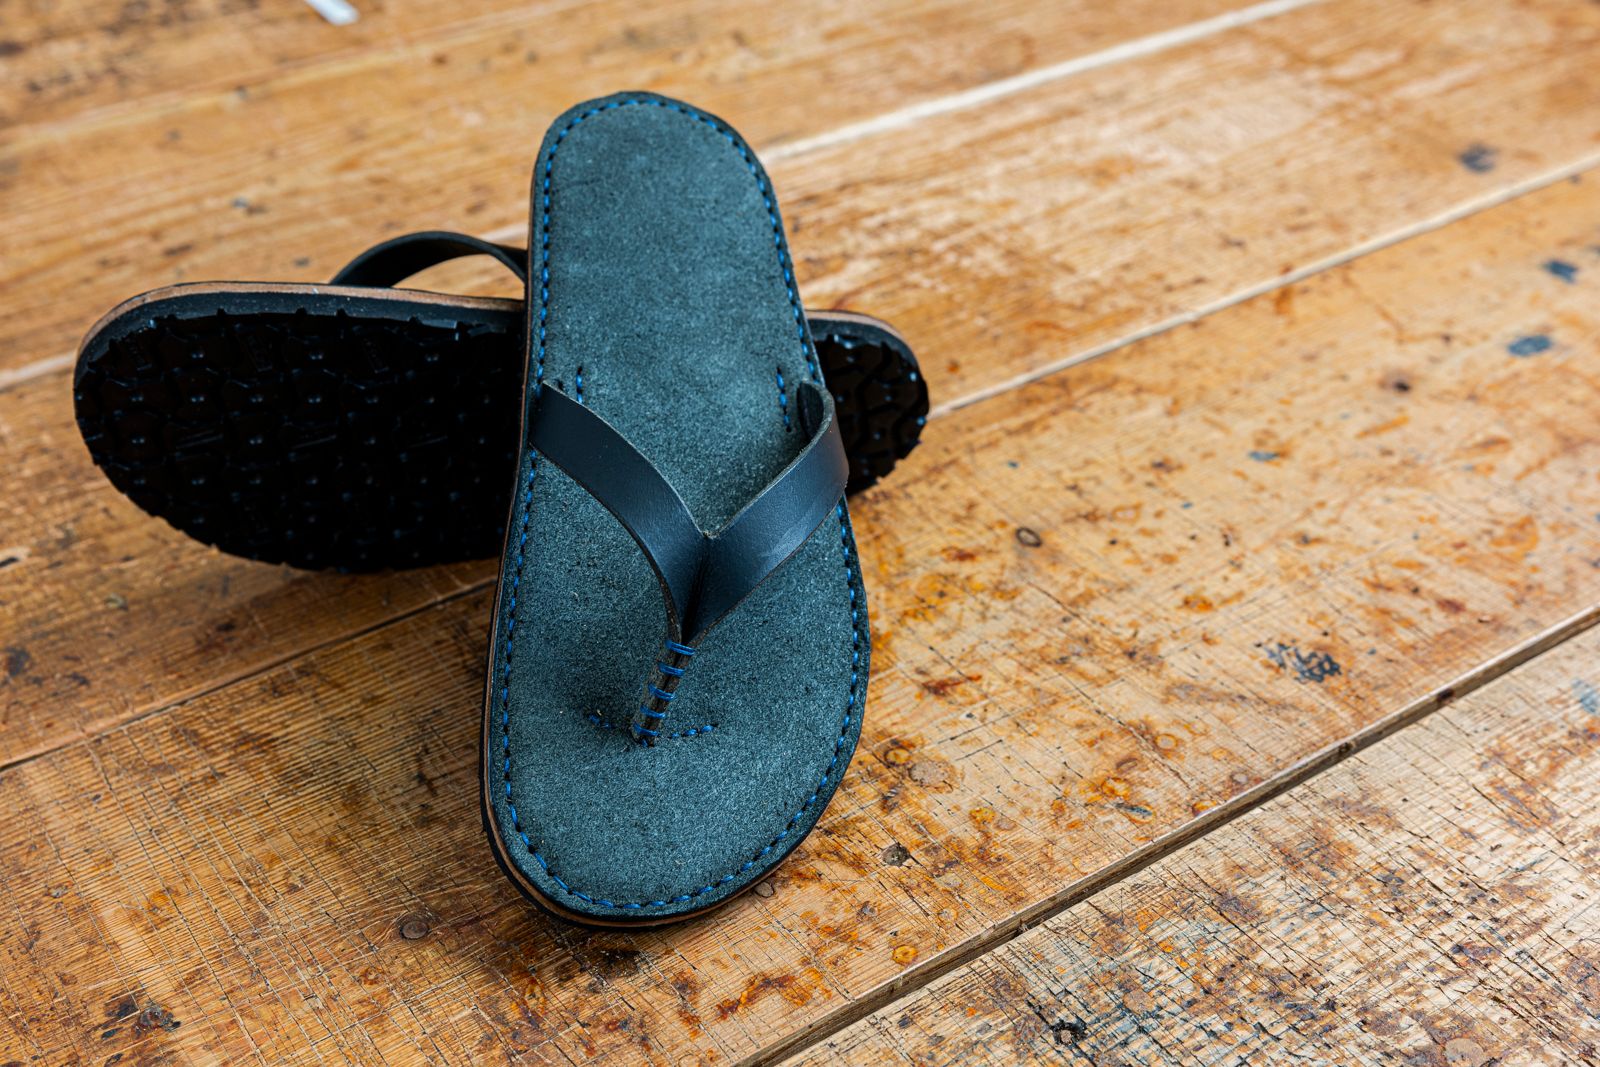 DIY Leathercraft: Step-by-Step Guide to Make Leather Sandals